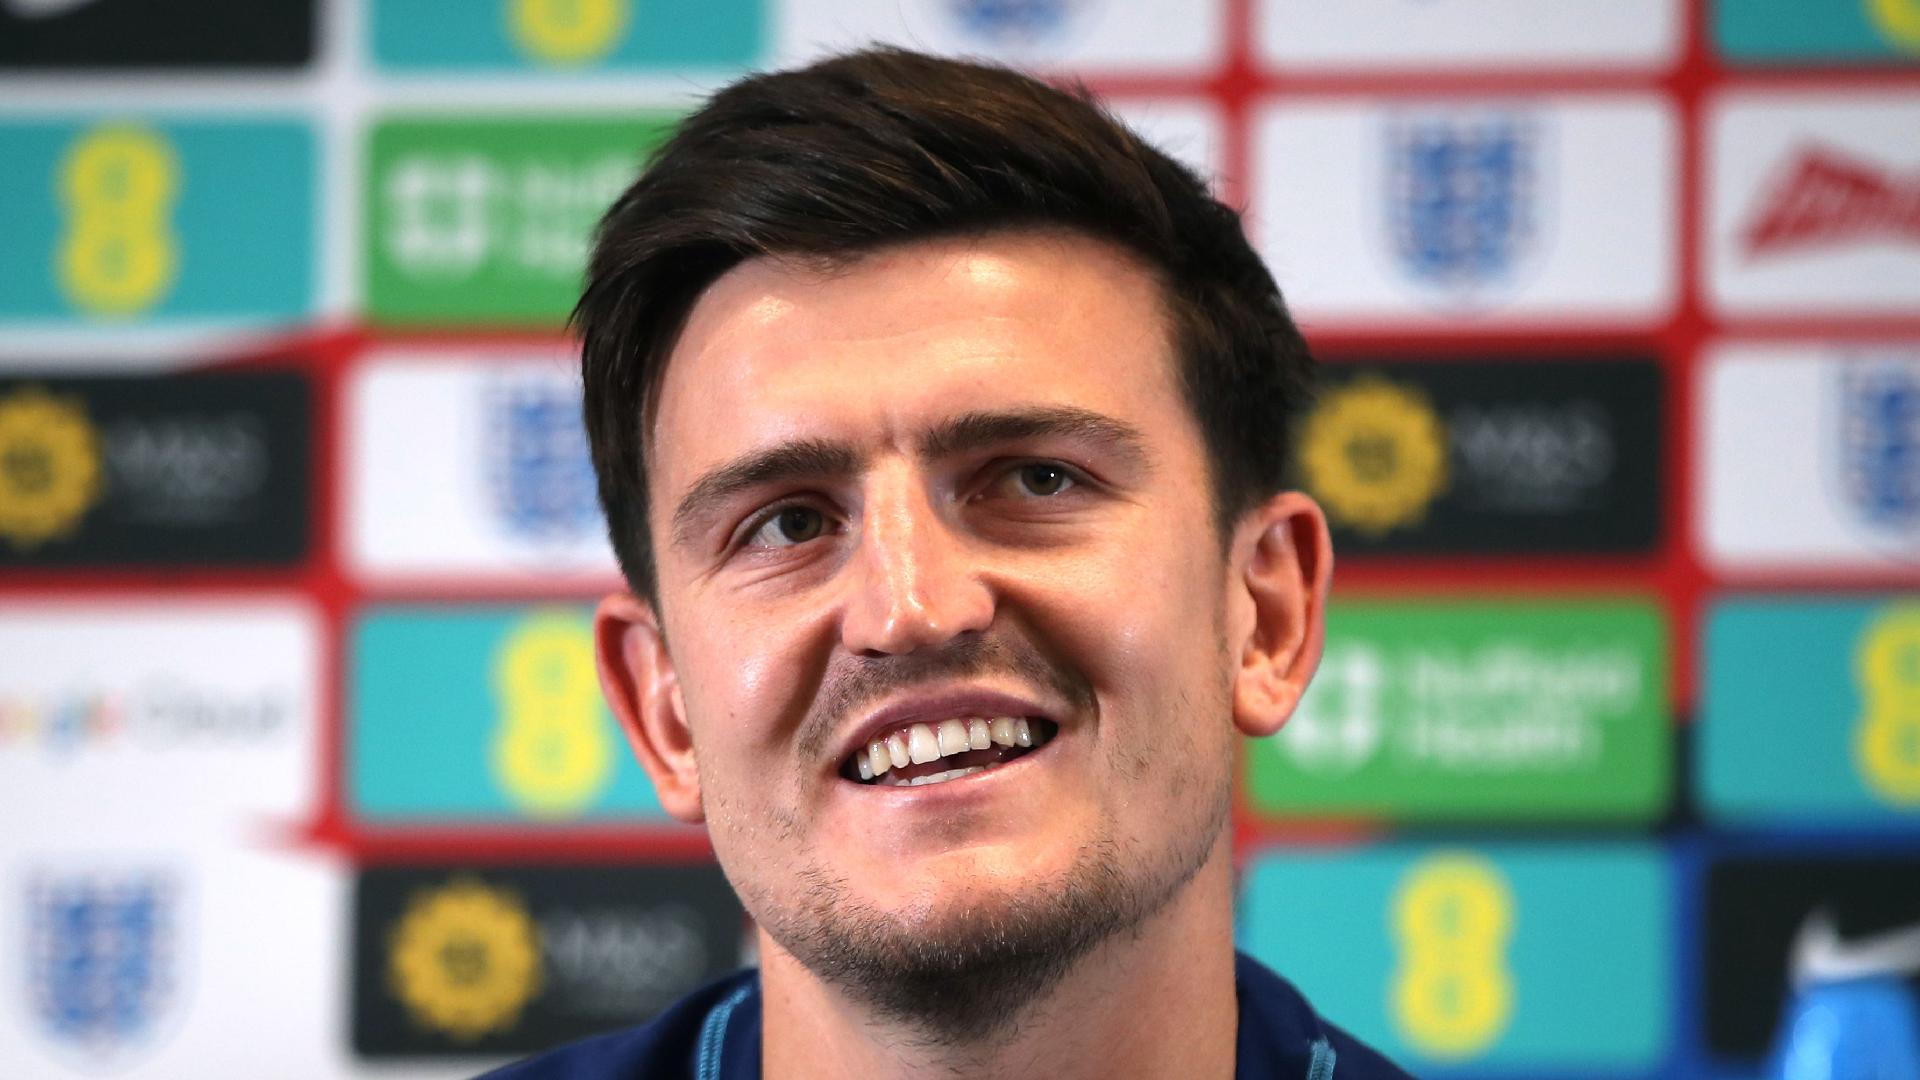 "Real reason I rejected West Ham" -- Harry Maguire